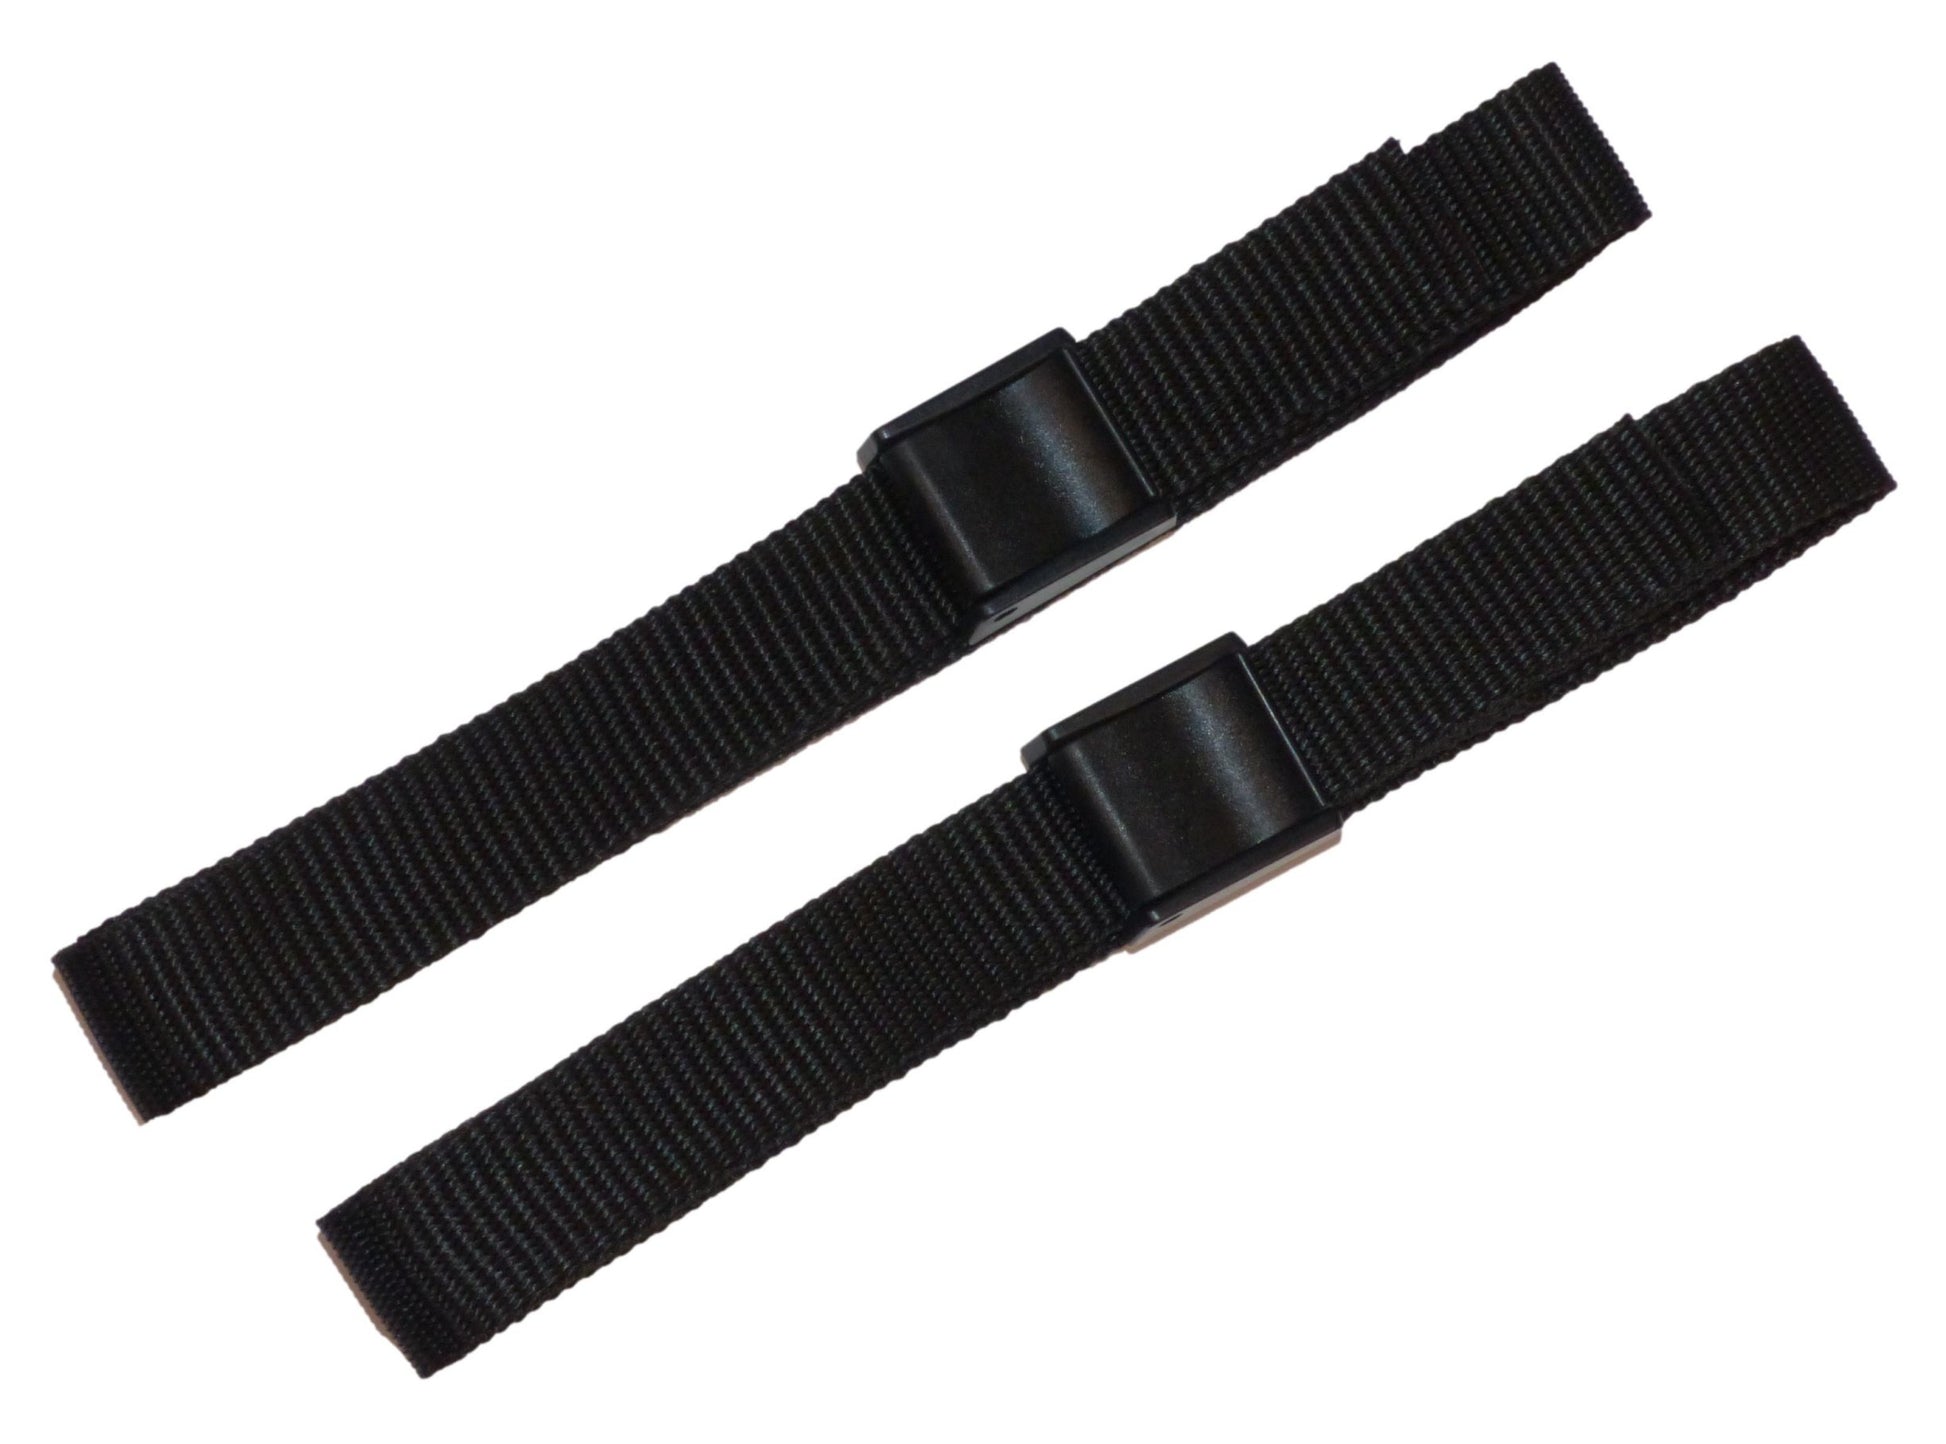 Benristraps 25mm Webbing Strap with Cam Buckle (Pair) in black